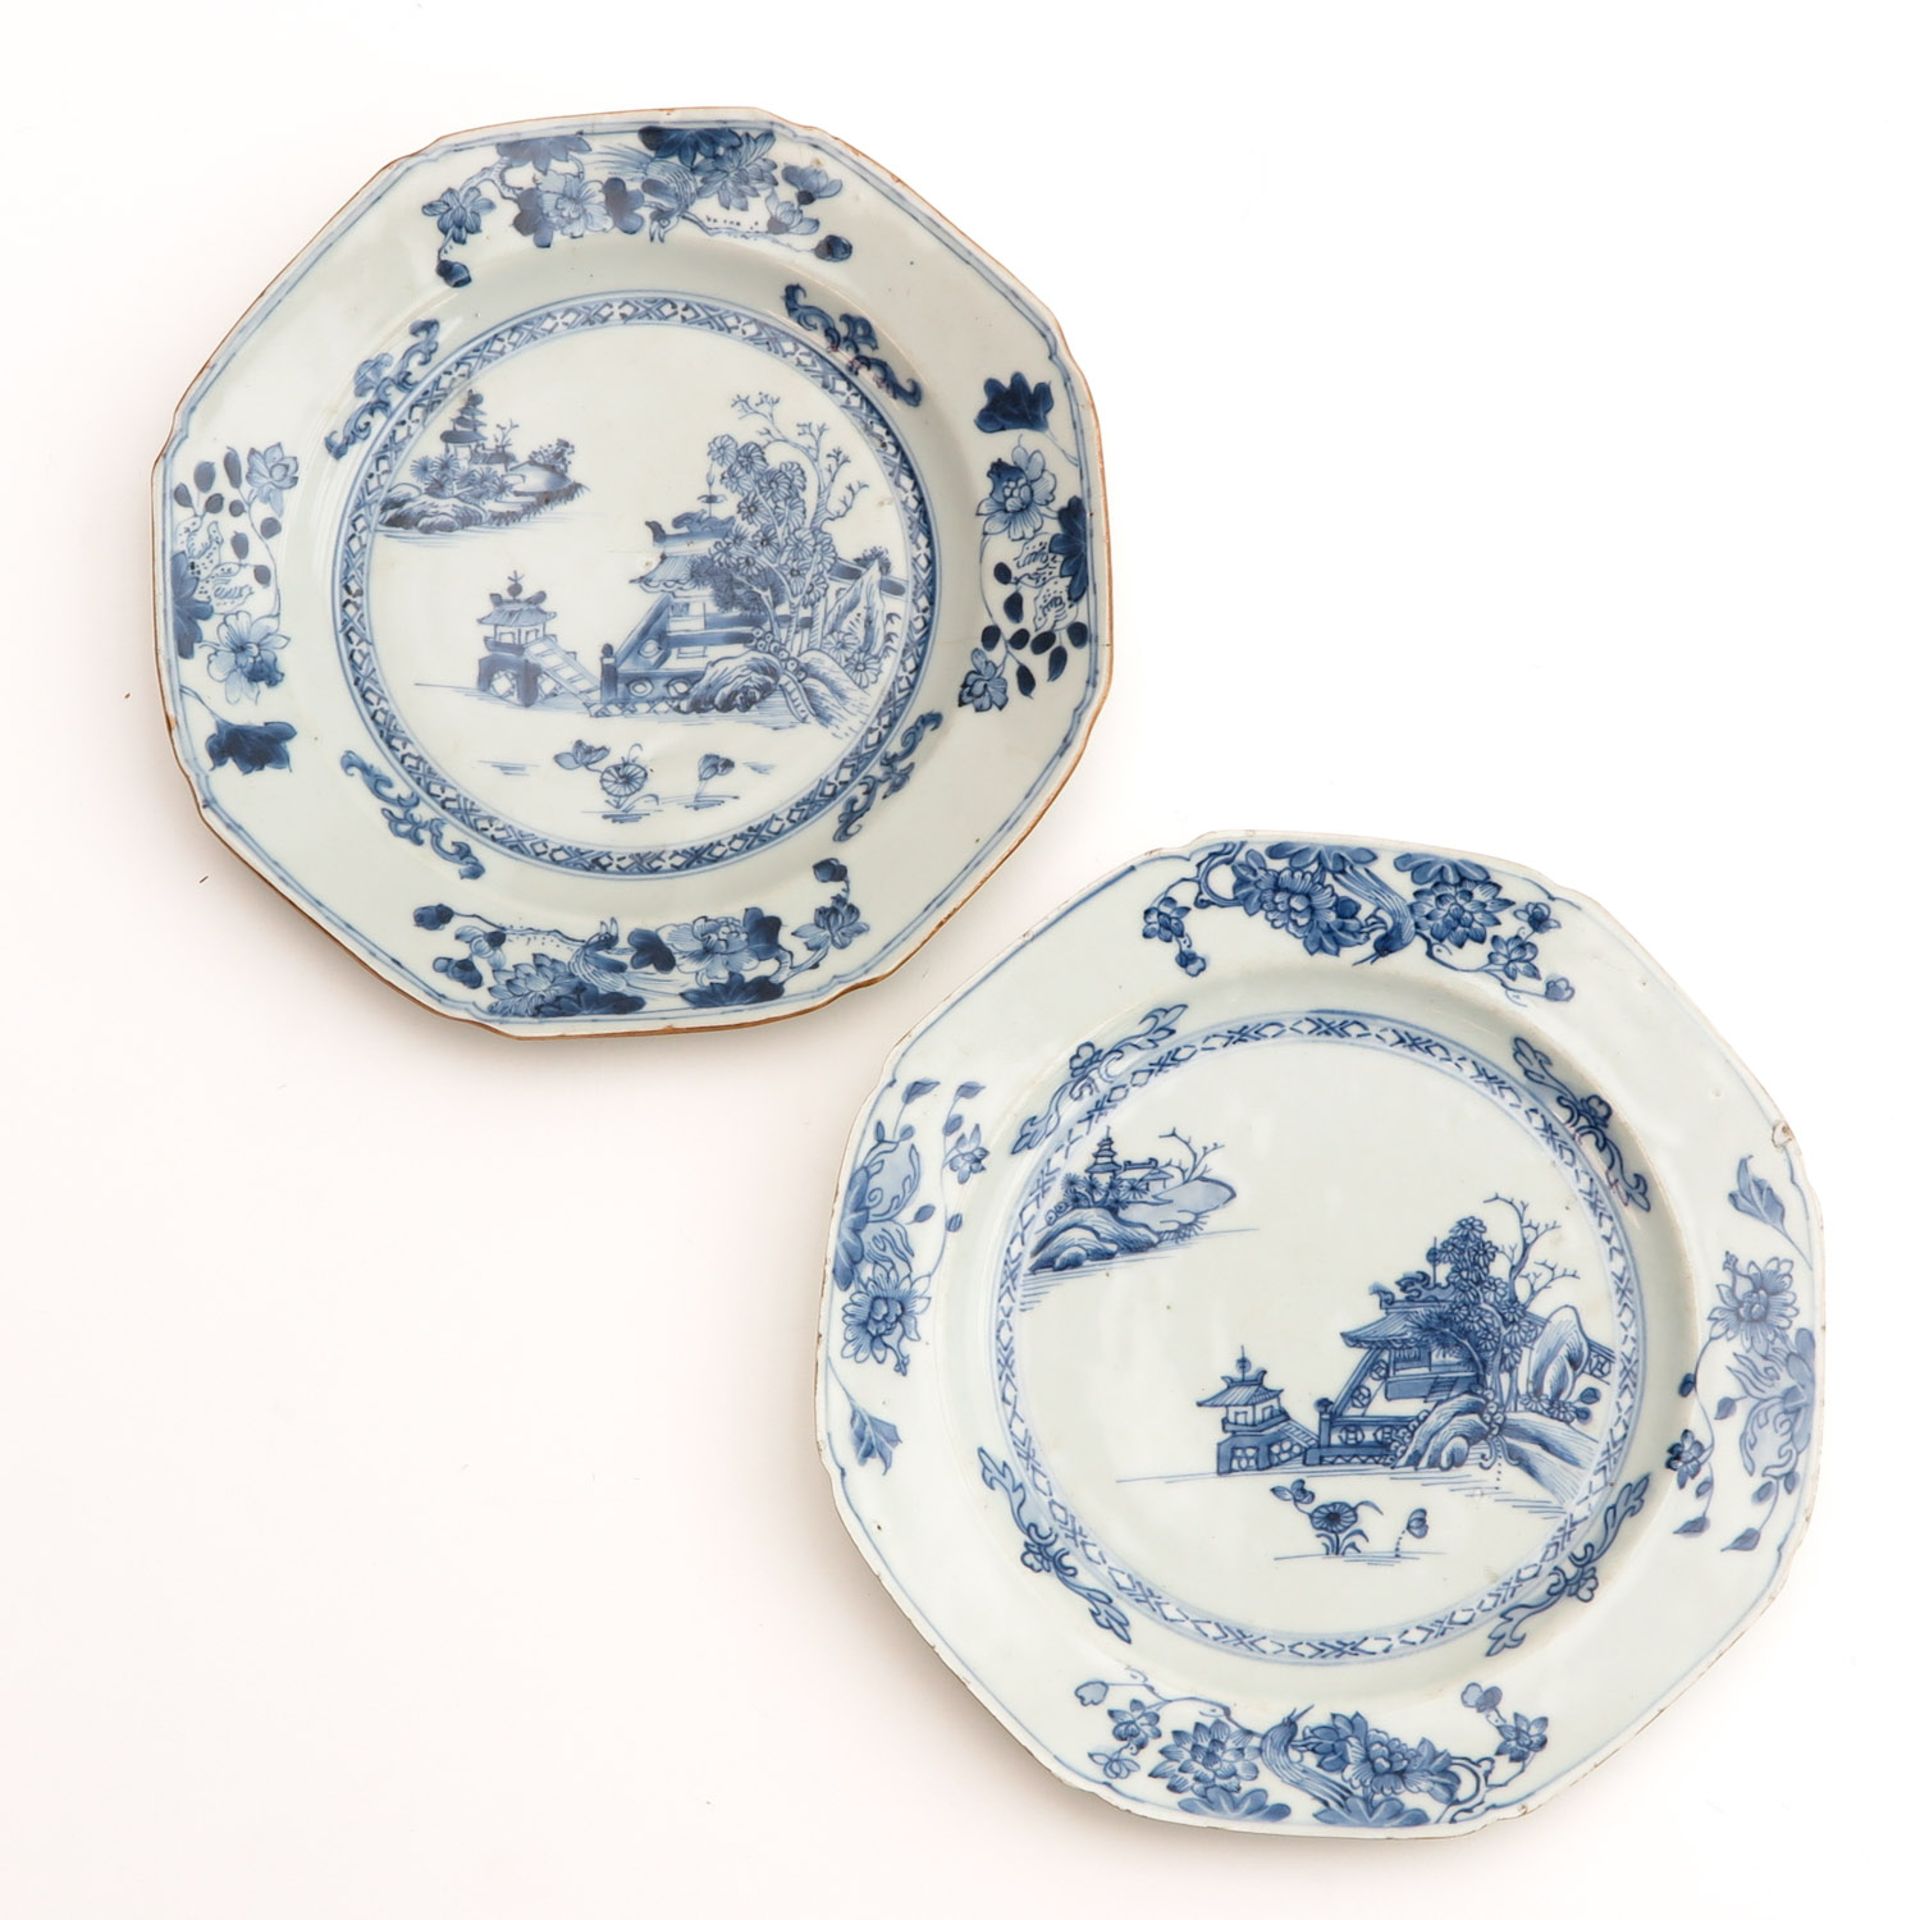 A Series of 4 Blue and White Plates - Image 3 of 10